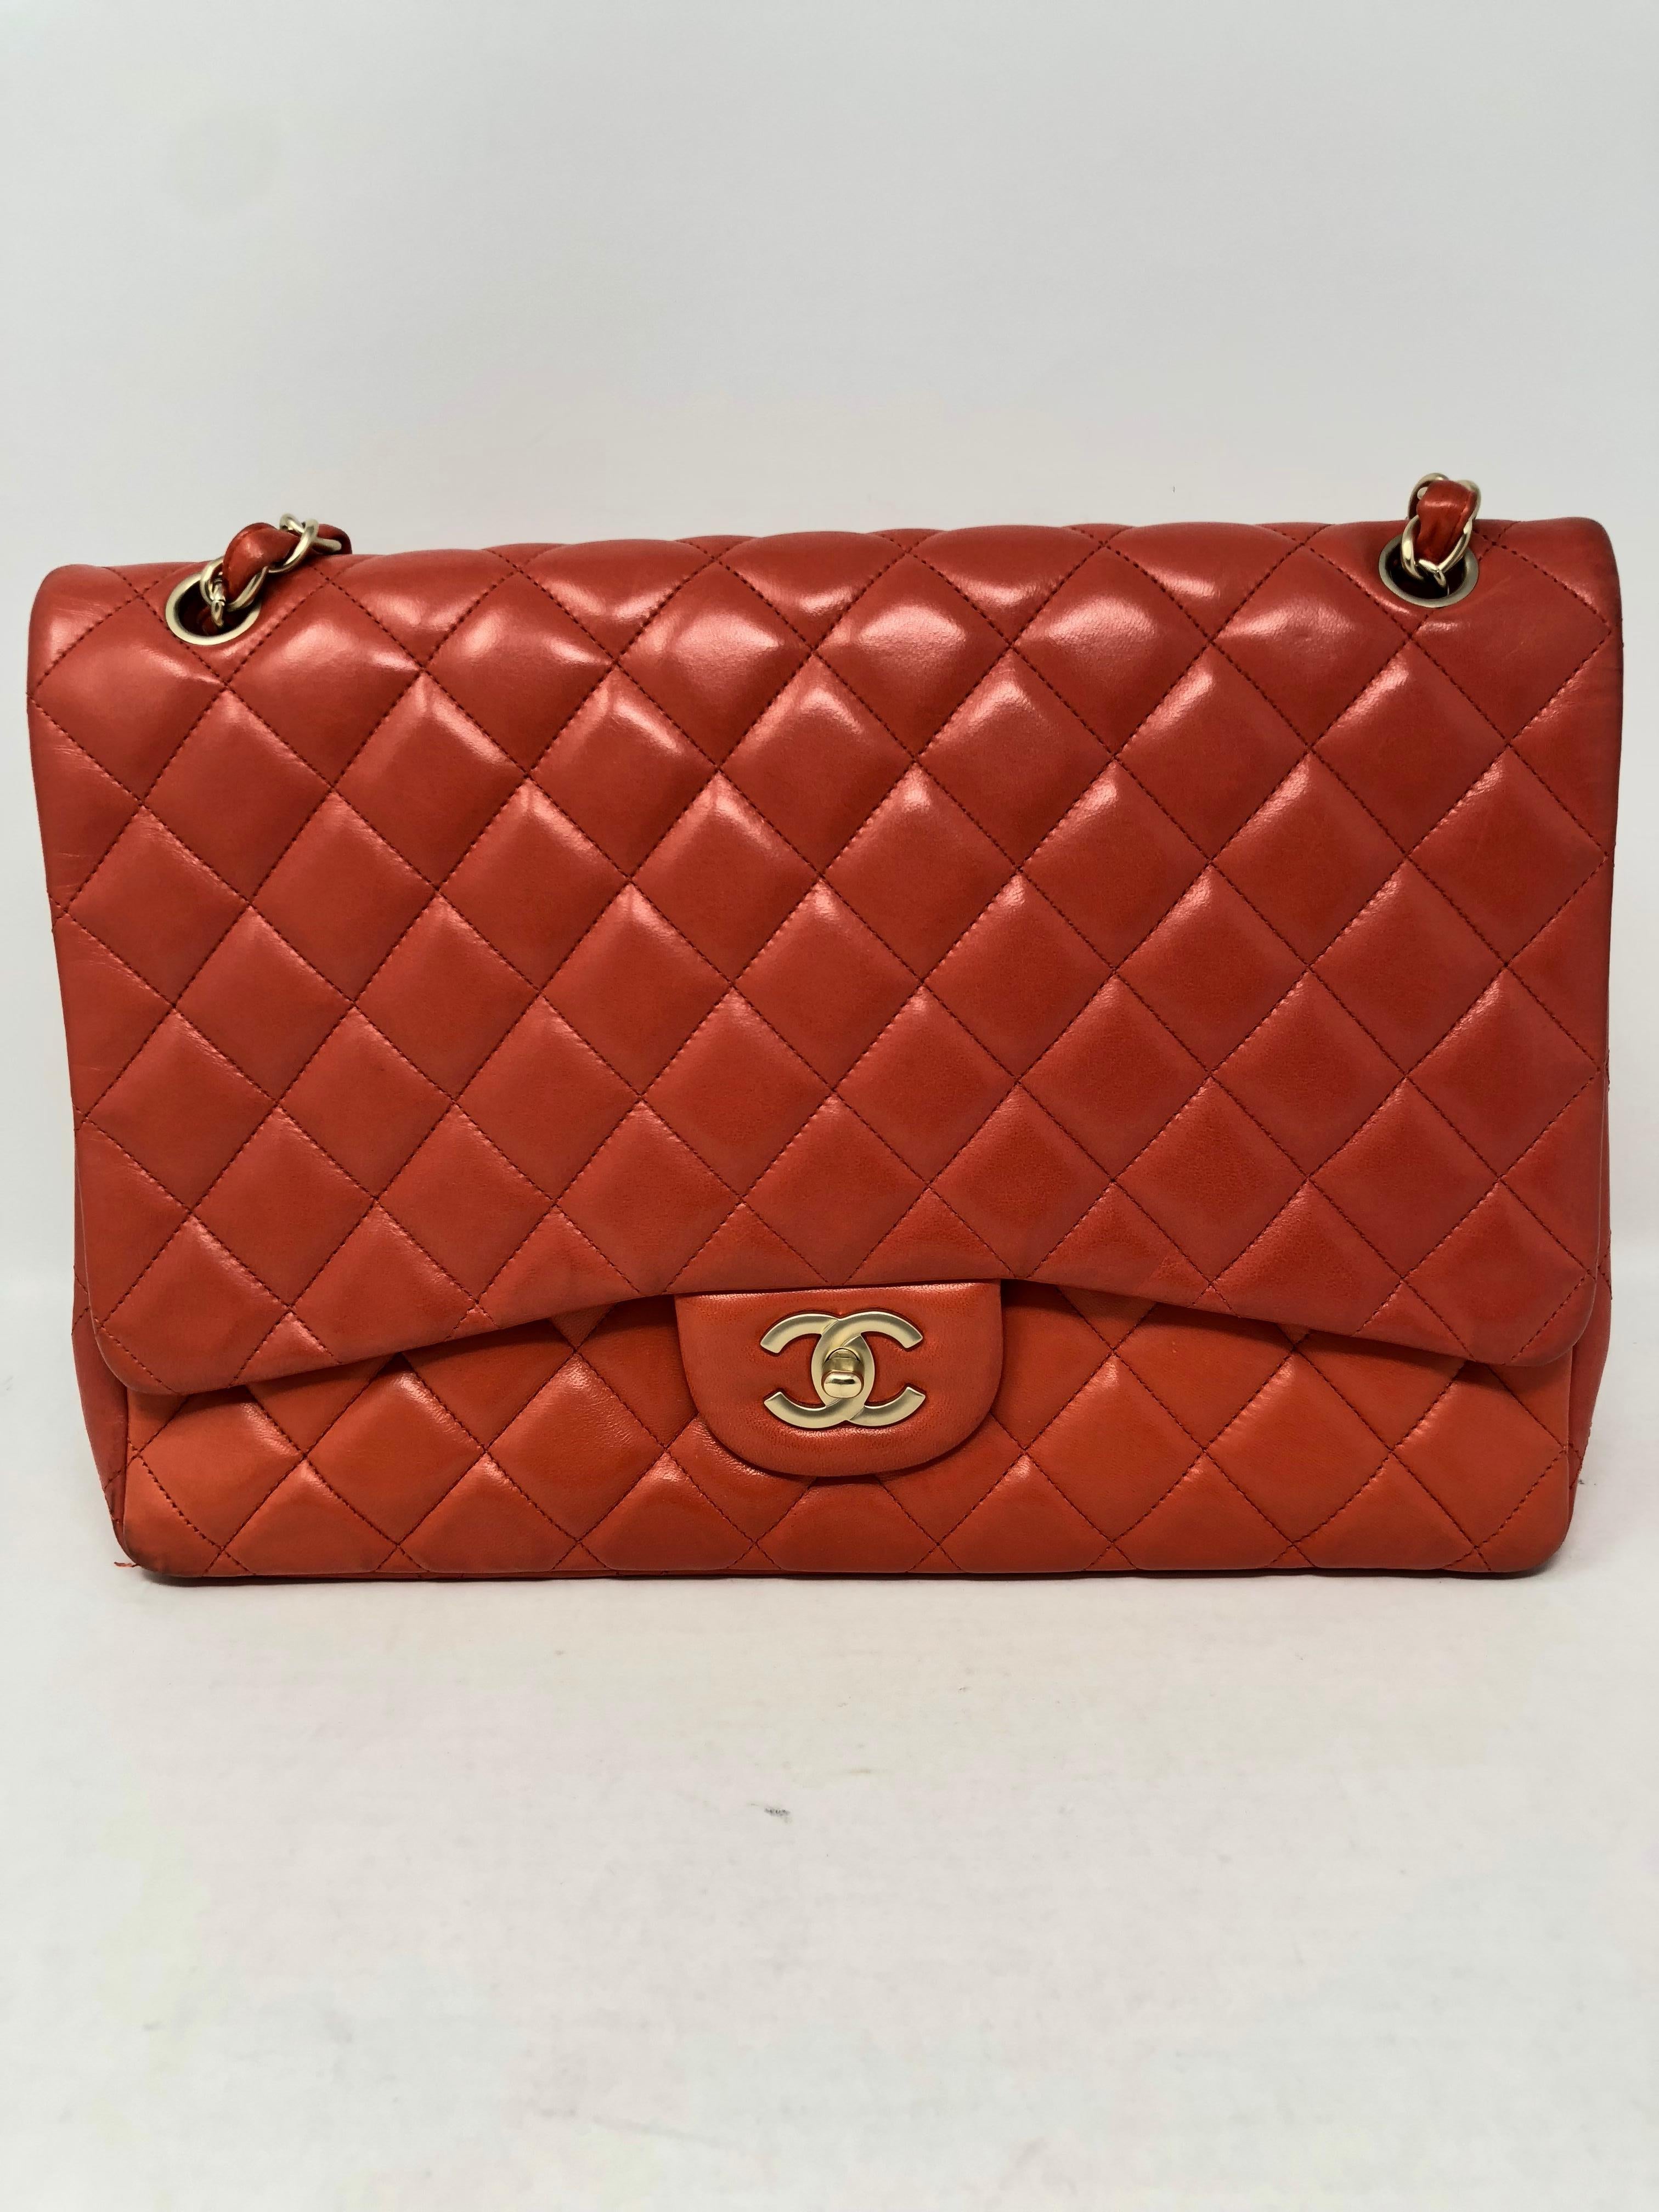 Chanel Coral Maxi Single Flap. Matte gold hardware. Some wear on back. Good condition. Dark coral/ red color. Lambskin leather. Can be worn crossbody as well. Guaranteed authentic. 